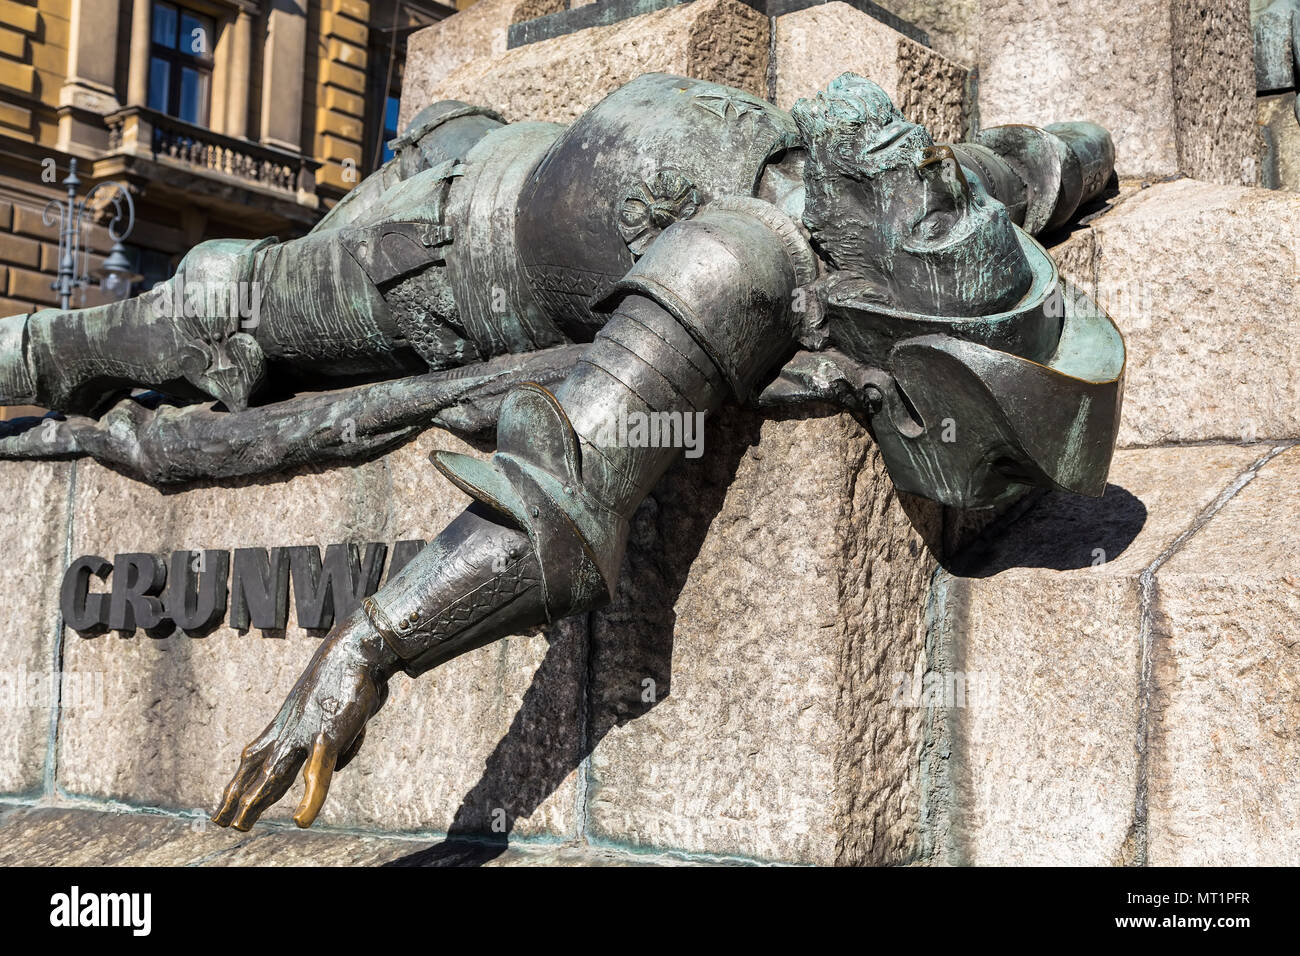 KRAKOW, POLAND - OKTOBER 28, 2015: A figure of a defeated knight on the monument to the battle of Grunwald in  Krakow. Poland Stock Photo